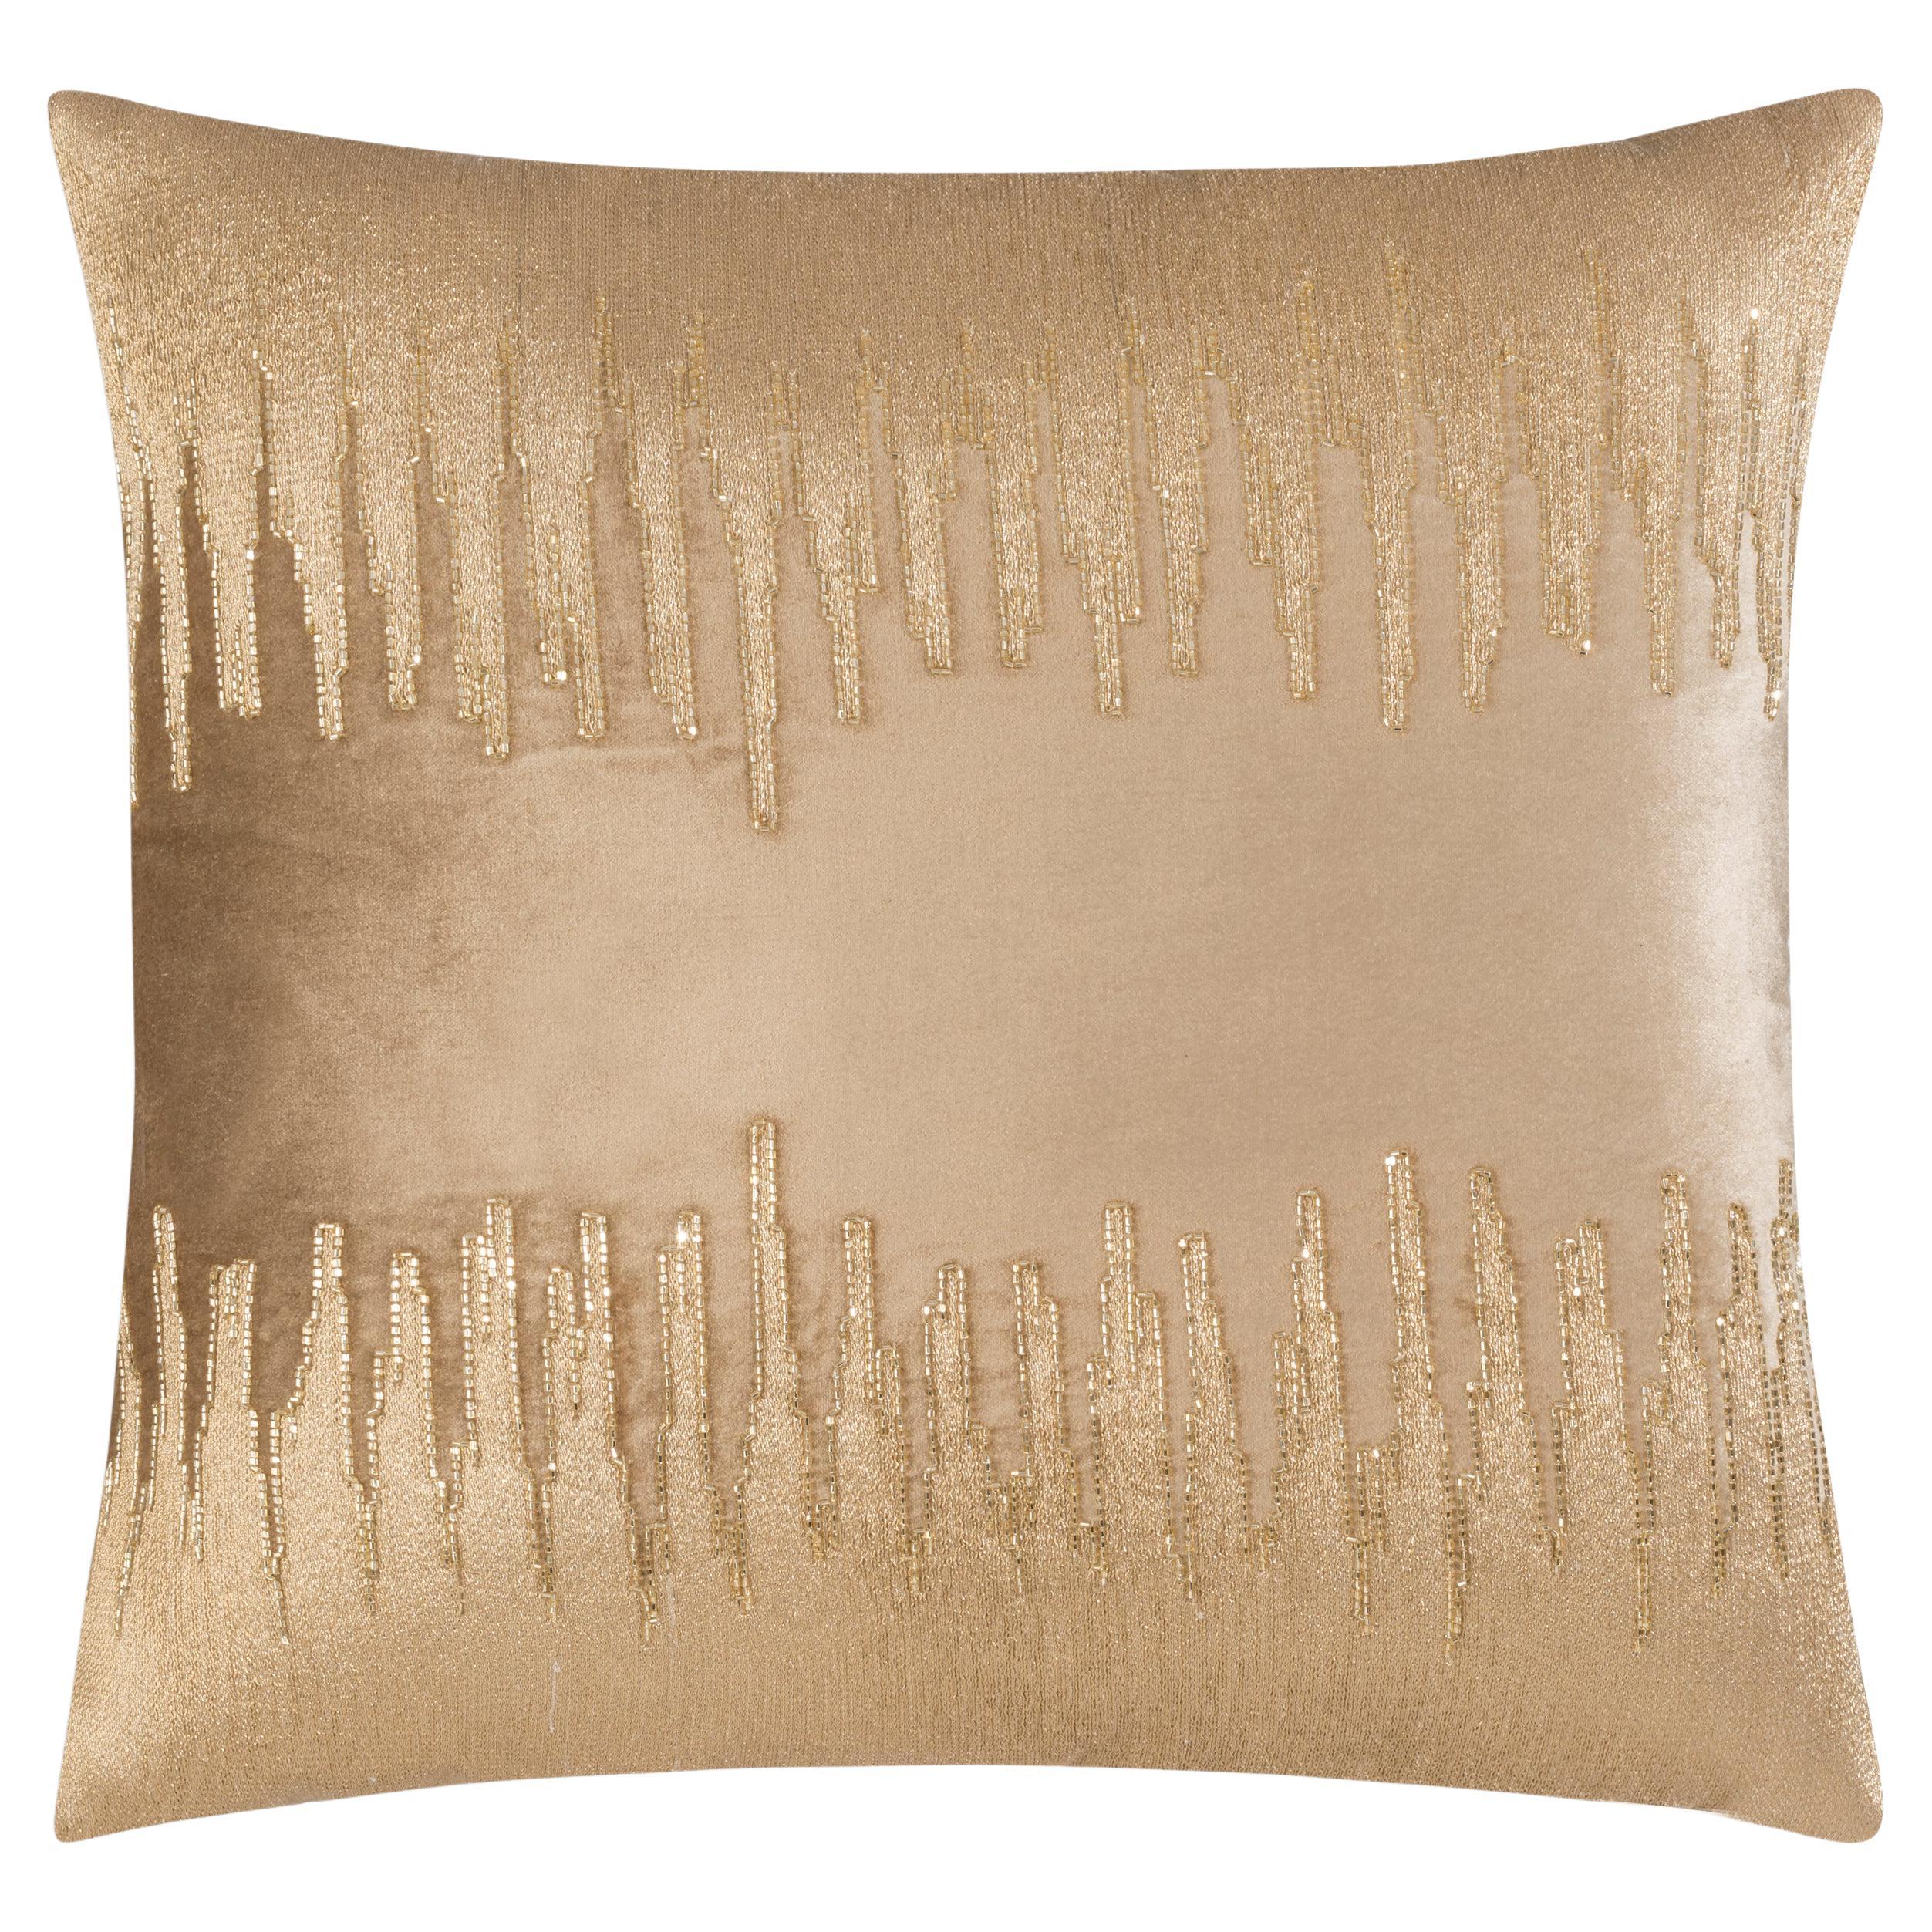 Sayra Stone Pillow, Gold For Sale